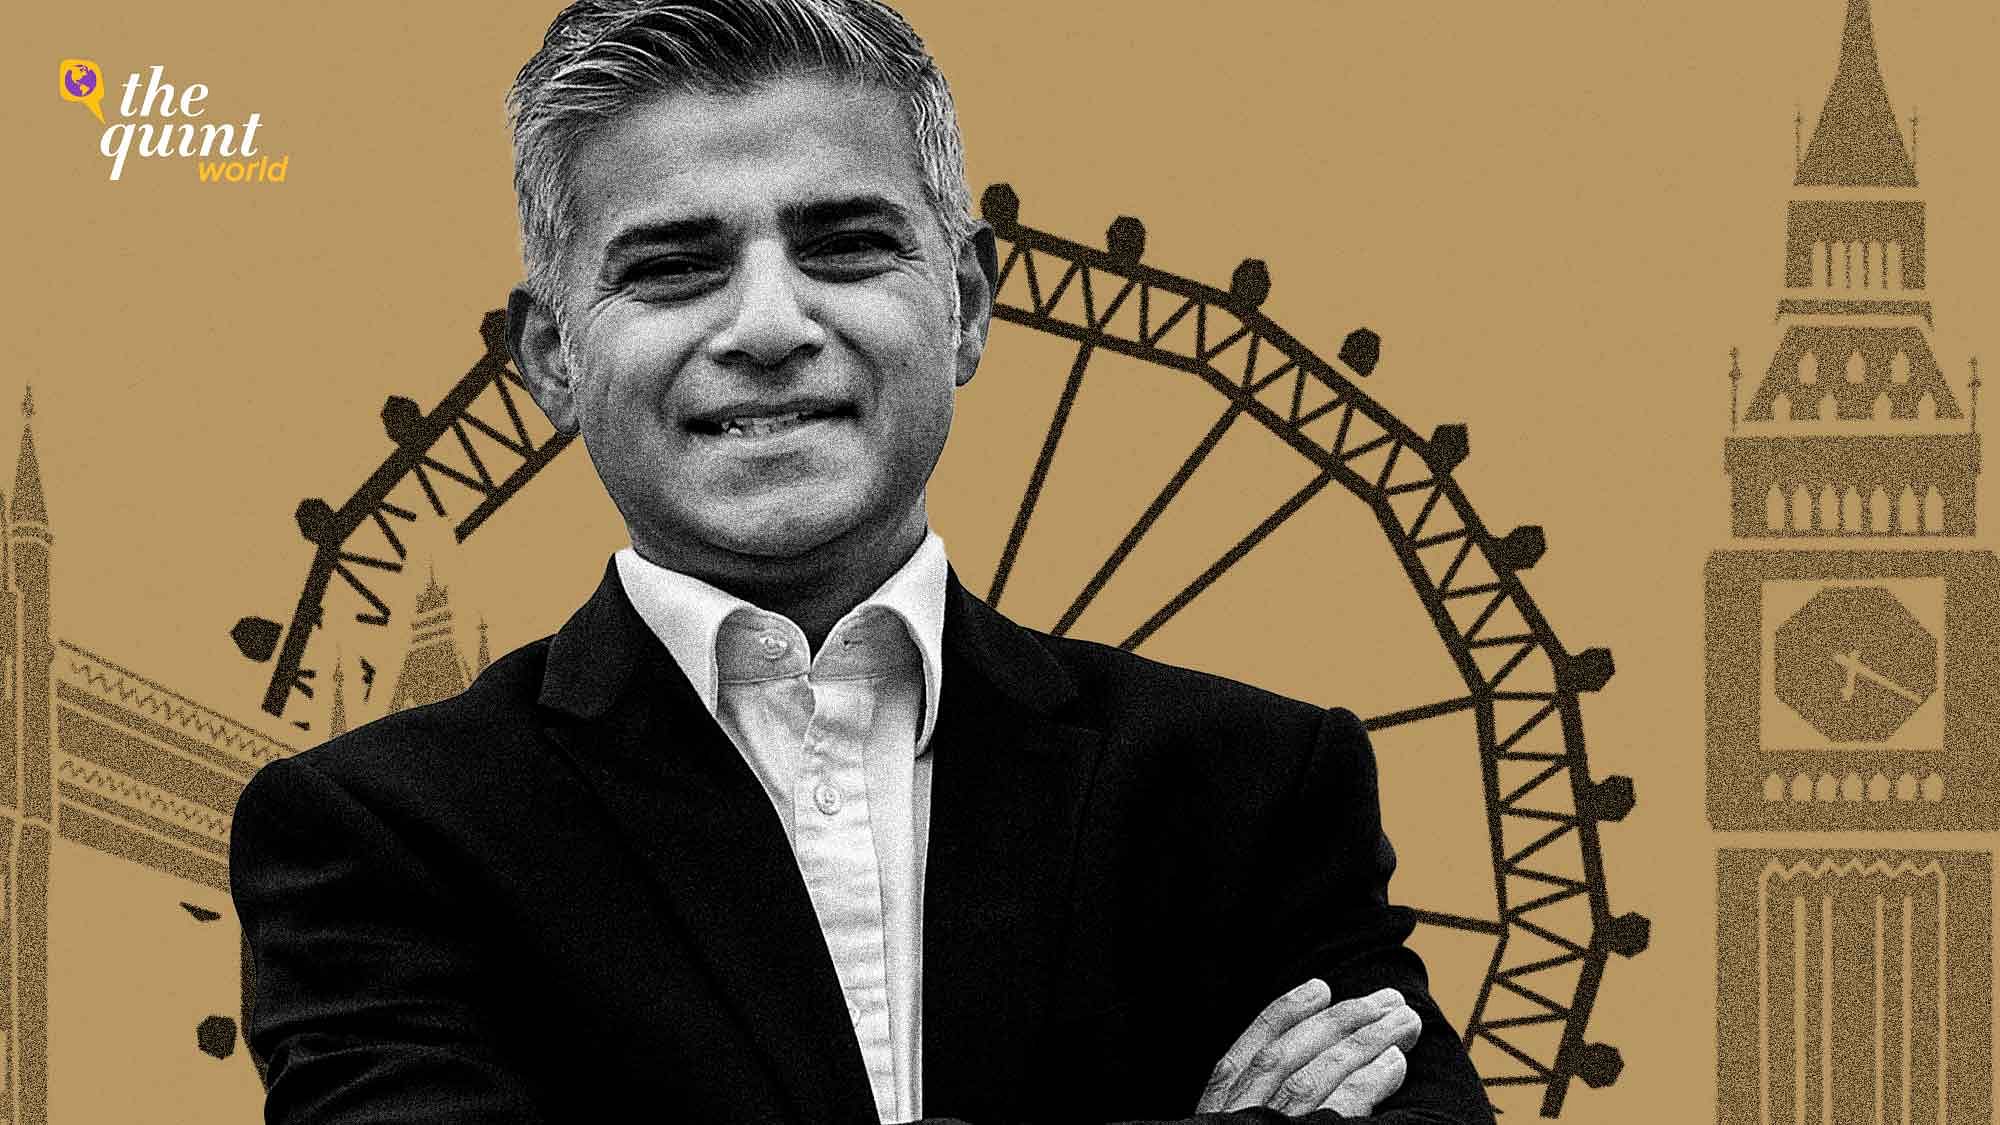 <div class="paragraphs"><p>Polls&nbsp;have&nbsp;consistently shown&nbsp;that the incumbent mayor of London, Sadiq Khan, appears to be on track to win a third term in office at the upcoming mayoral elections on 2 May.</p></div>